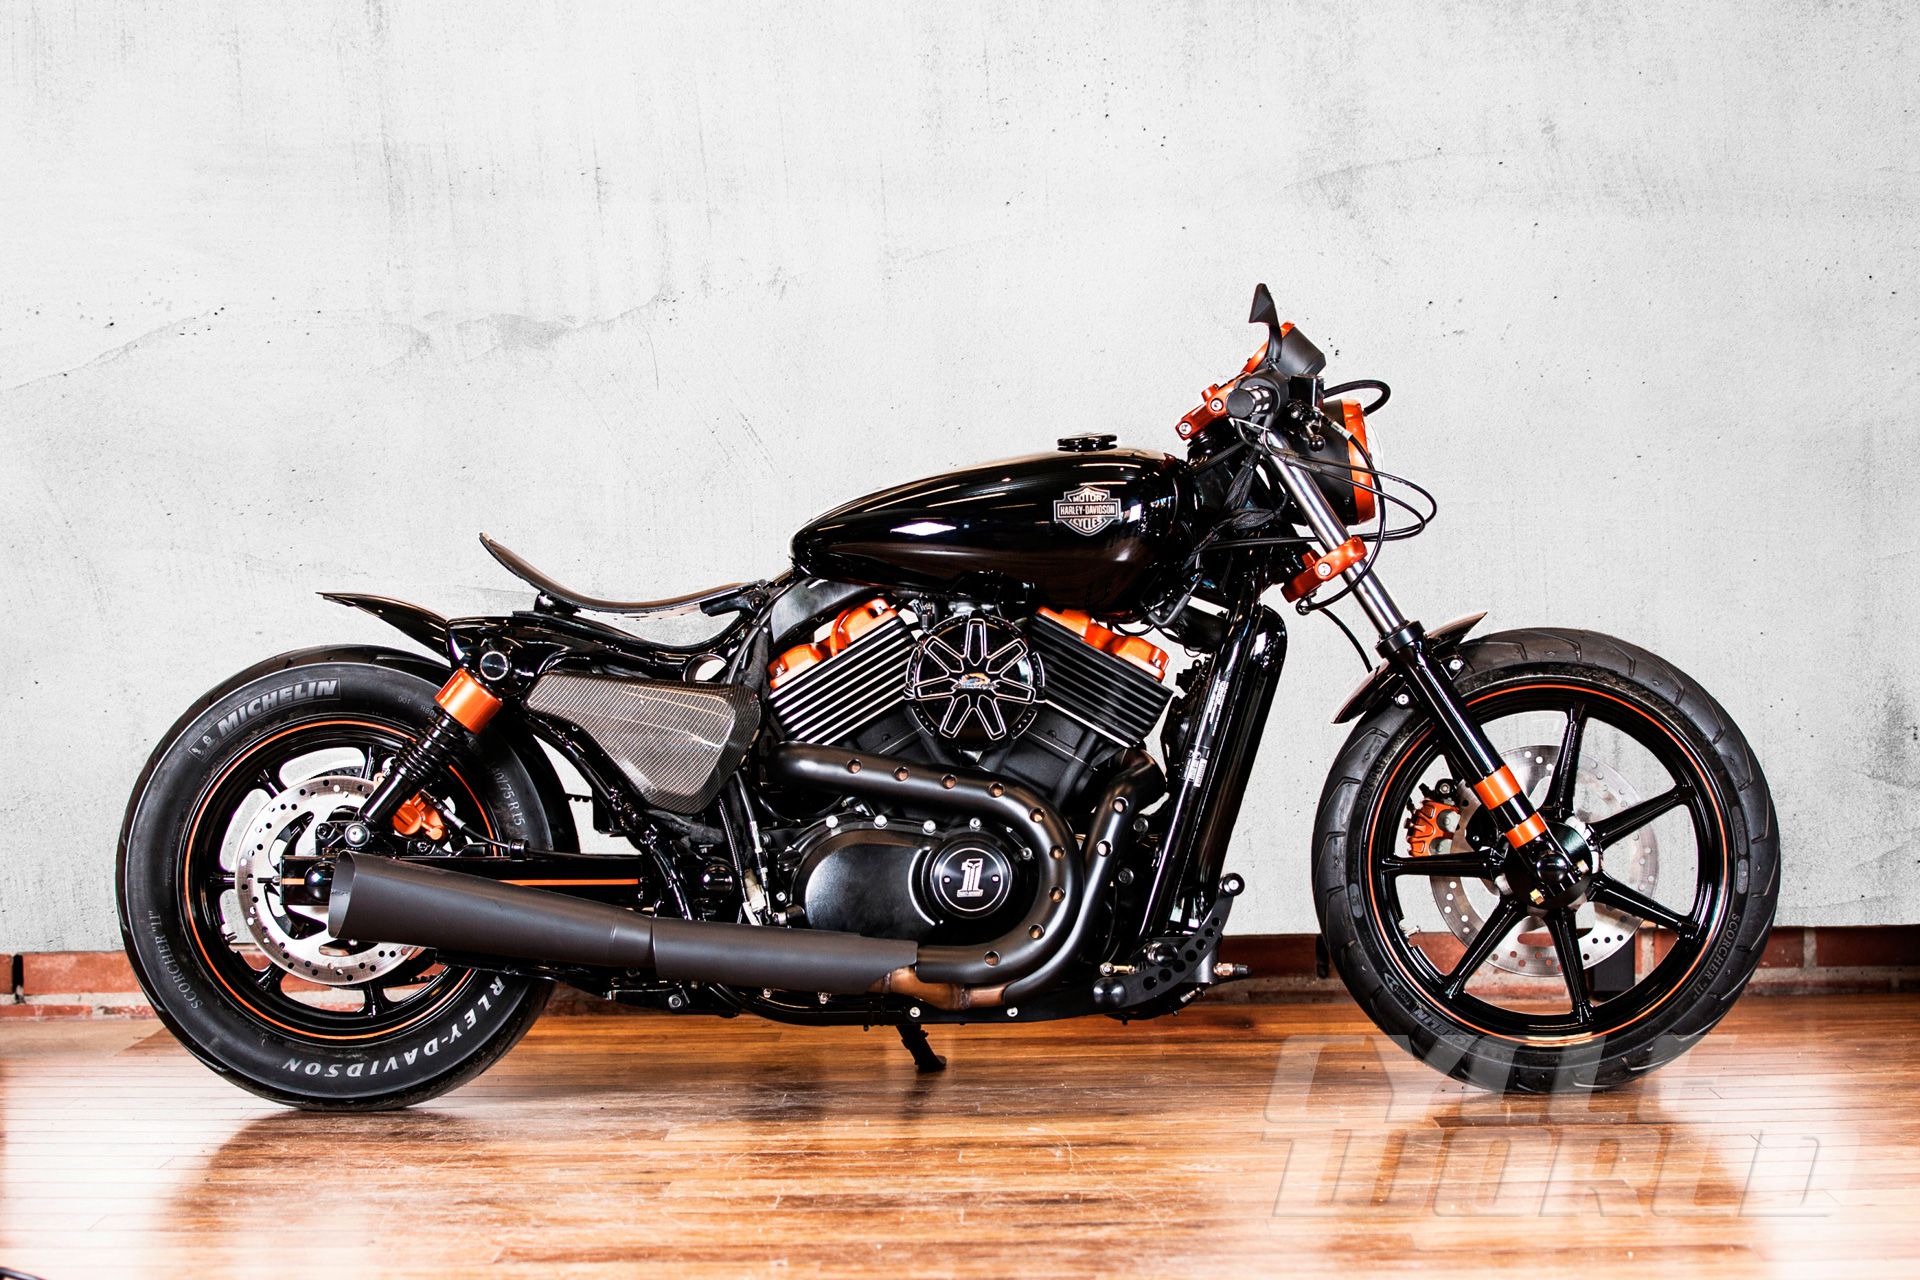 Harley Davidson Battle Of The Kings H D Street 750 Custom Motorcycles Cycle World